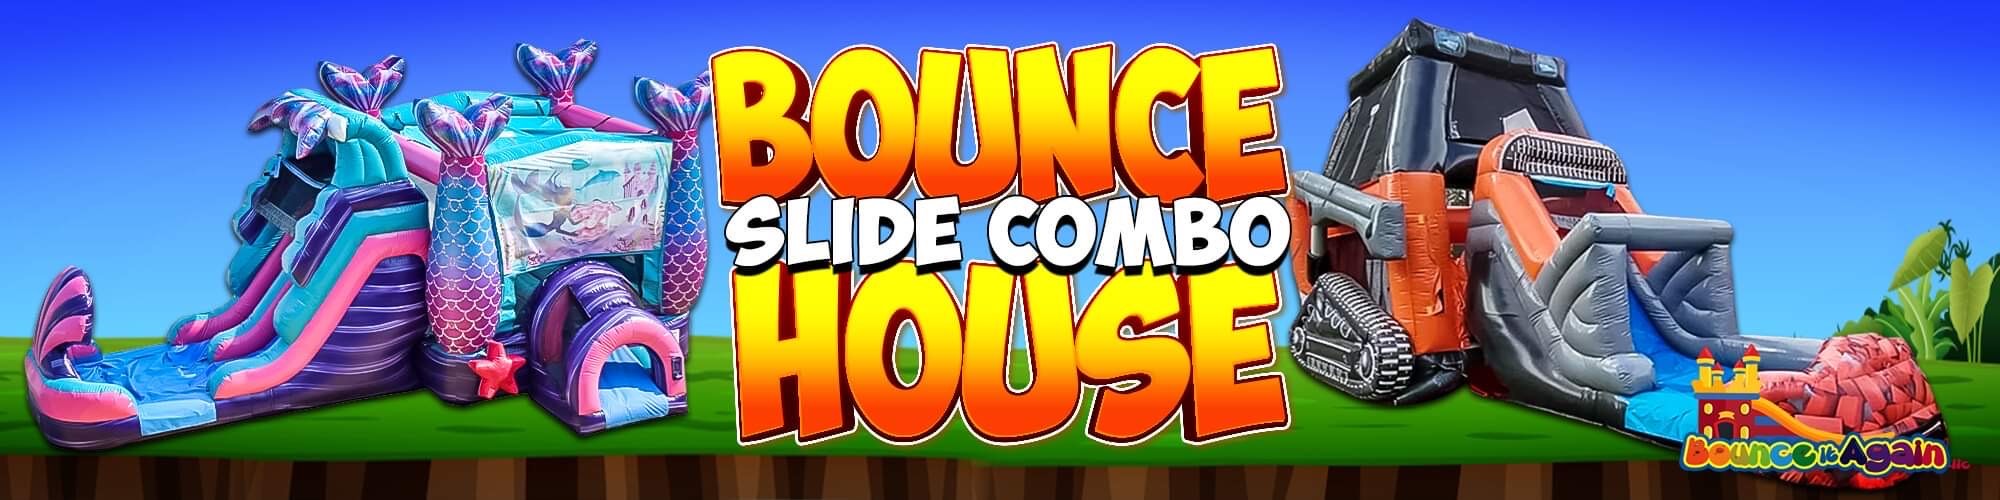 Bouncer With Slide - Bounce It Again #1 For Fun! 